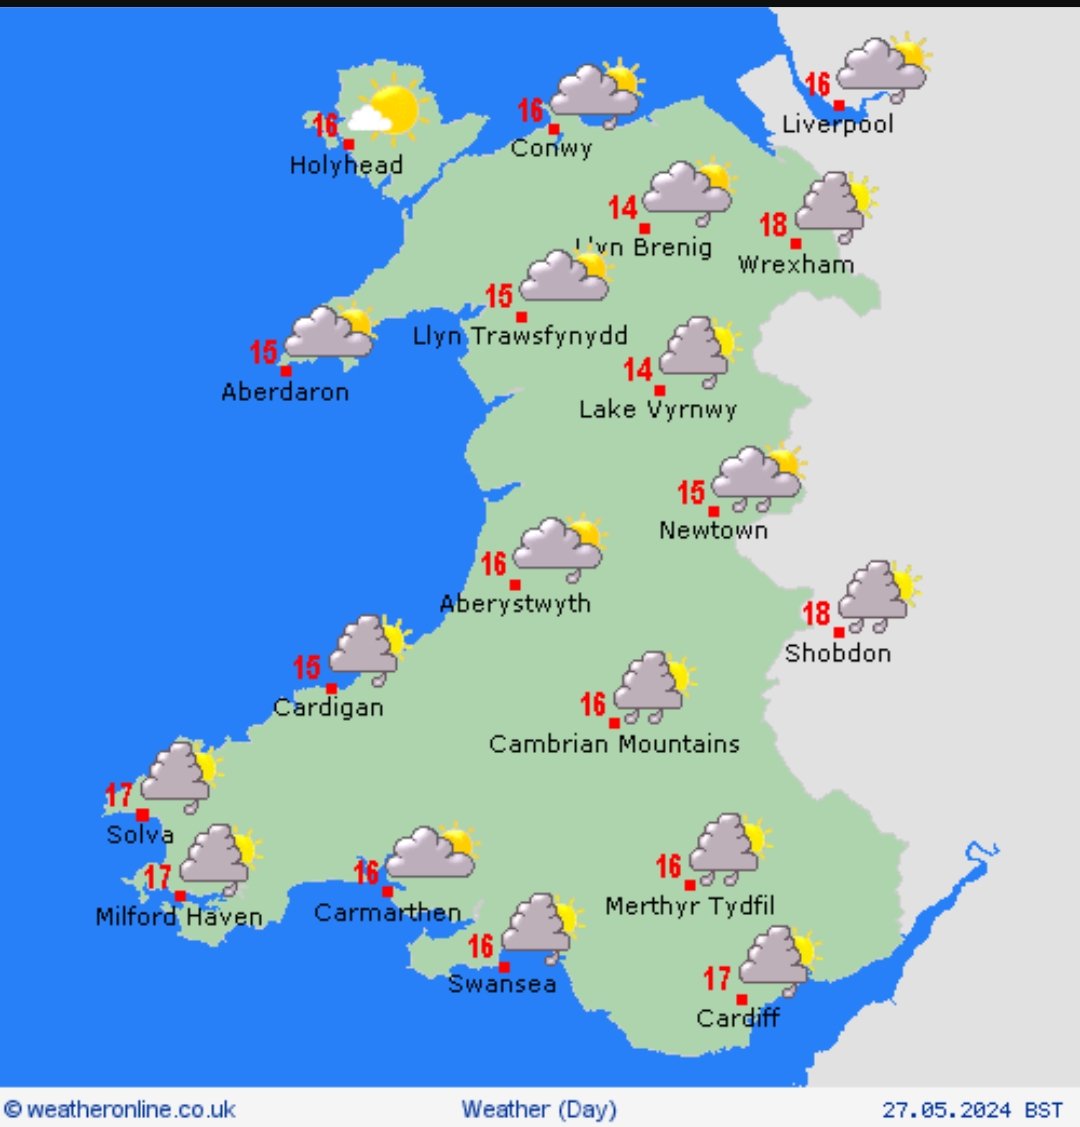 Plans for the bank holiday weekend? Most of Saturday dry and bright with some hazy sunshine. Rain spreading from the southwest during the evening and night. Sunny intervals and showers on Sunday some heavy showers with thunder. Showers lighter on Monday with some dry weather.